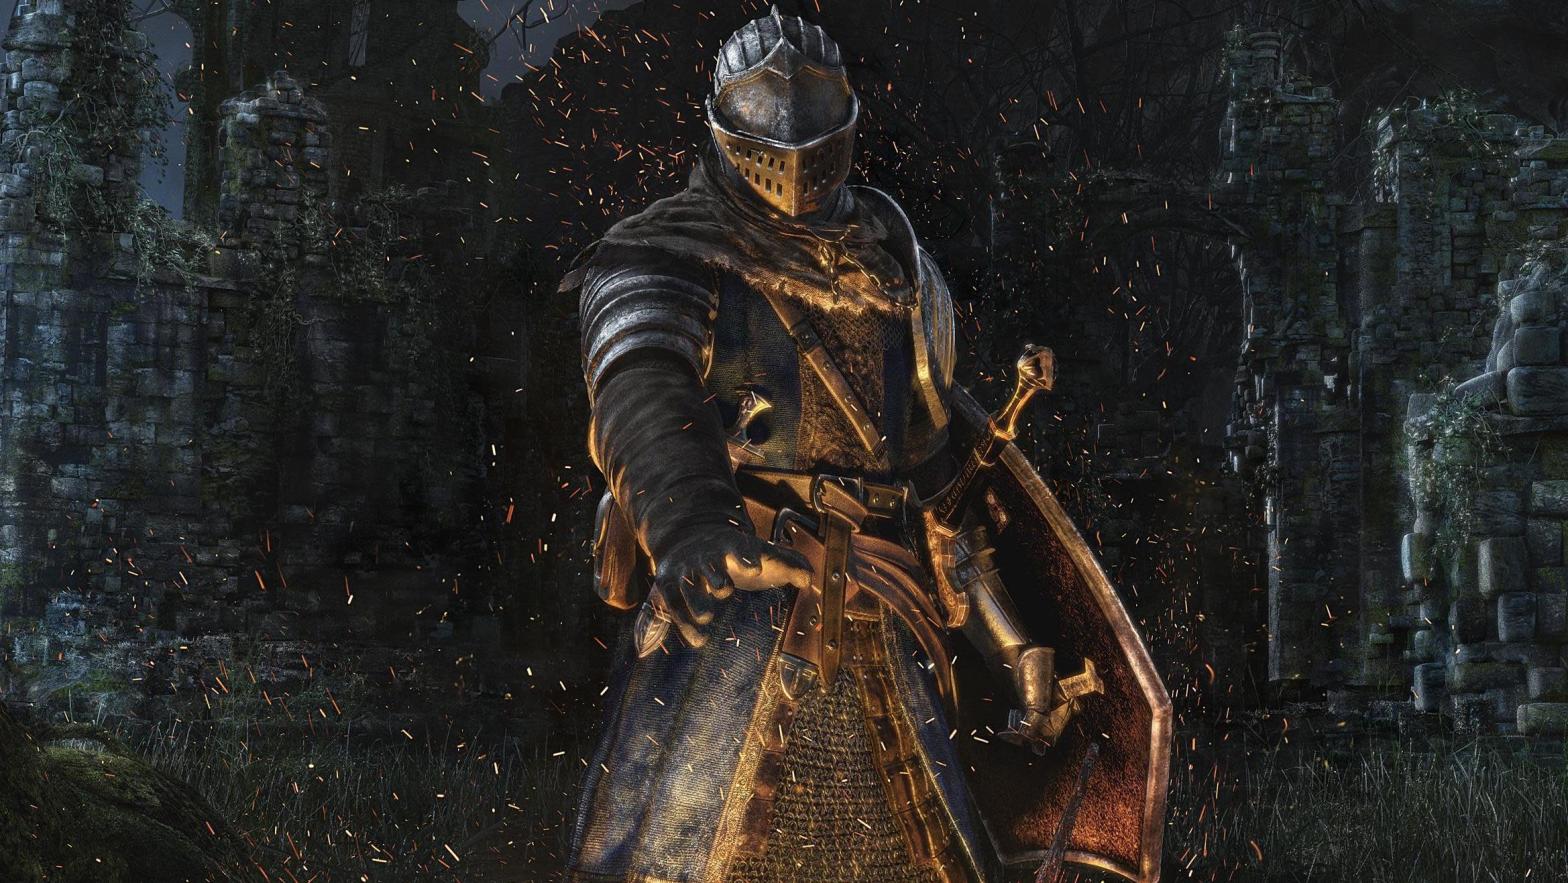 (This isn't the mod, they haven't released screenshots yet) (Image: Dark Souls)